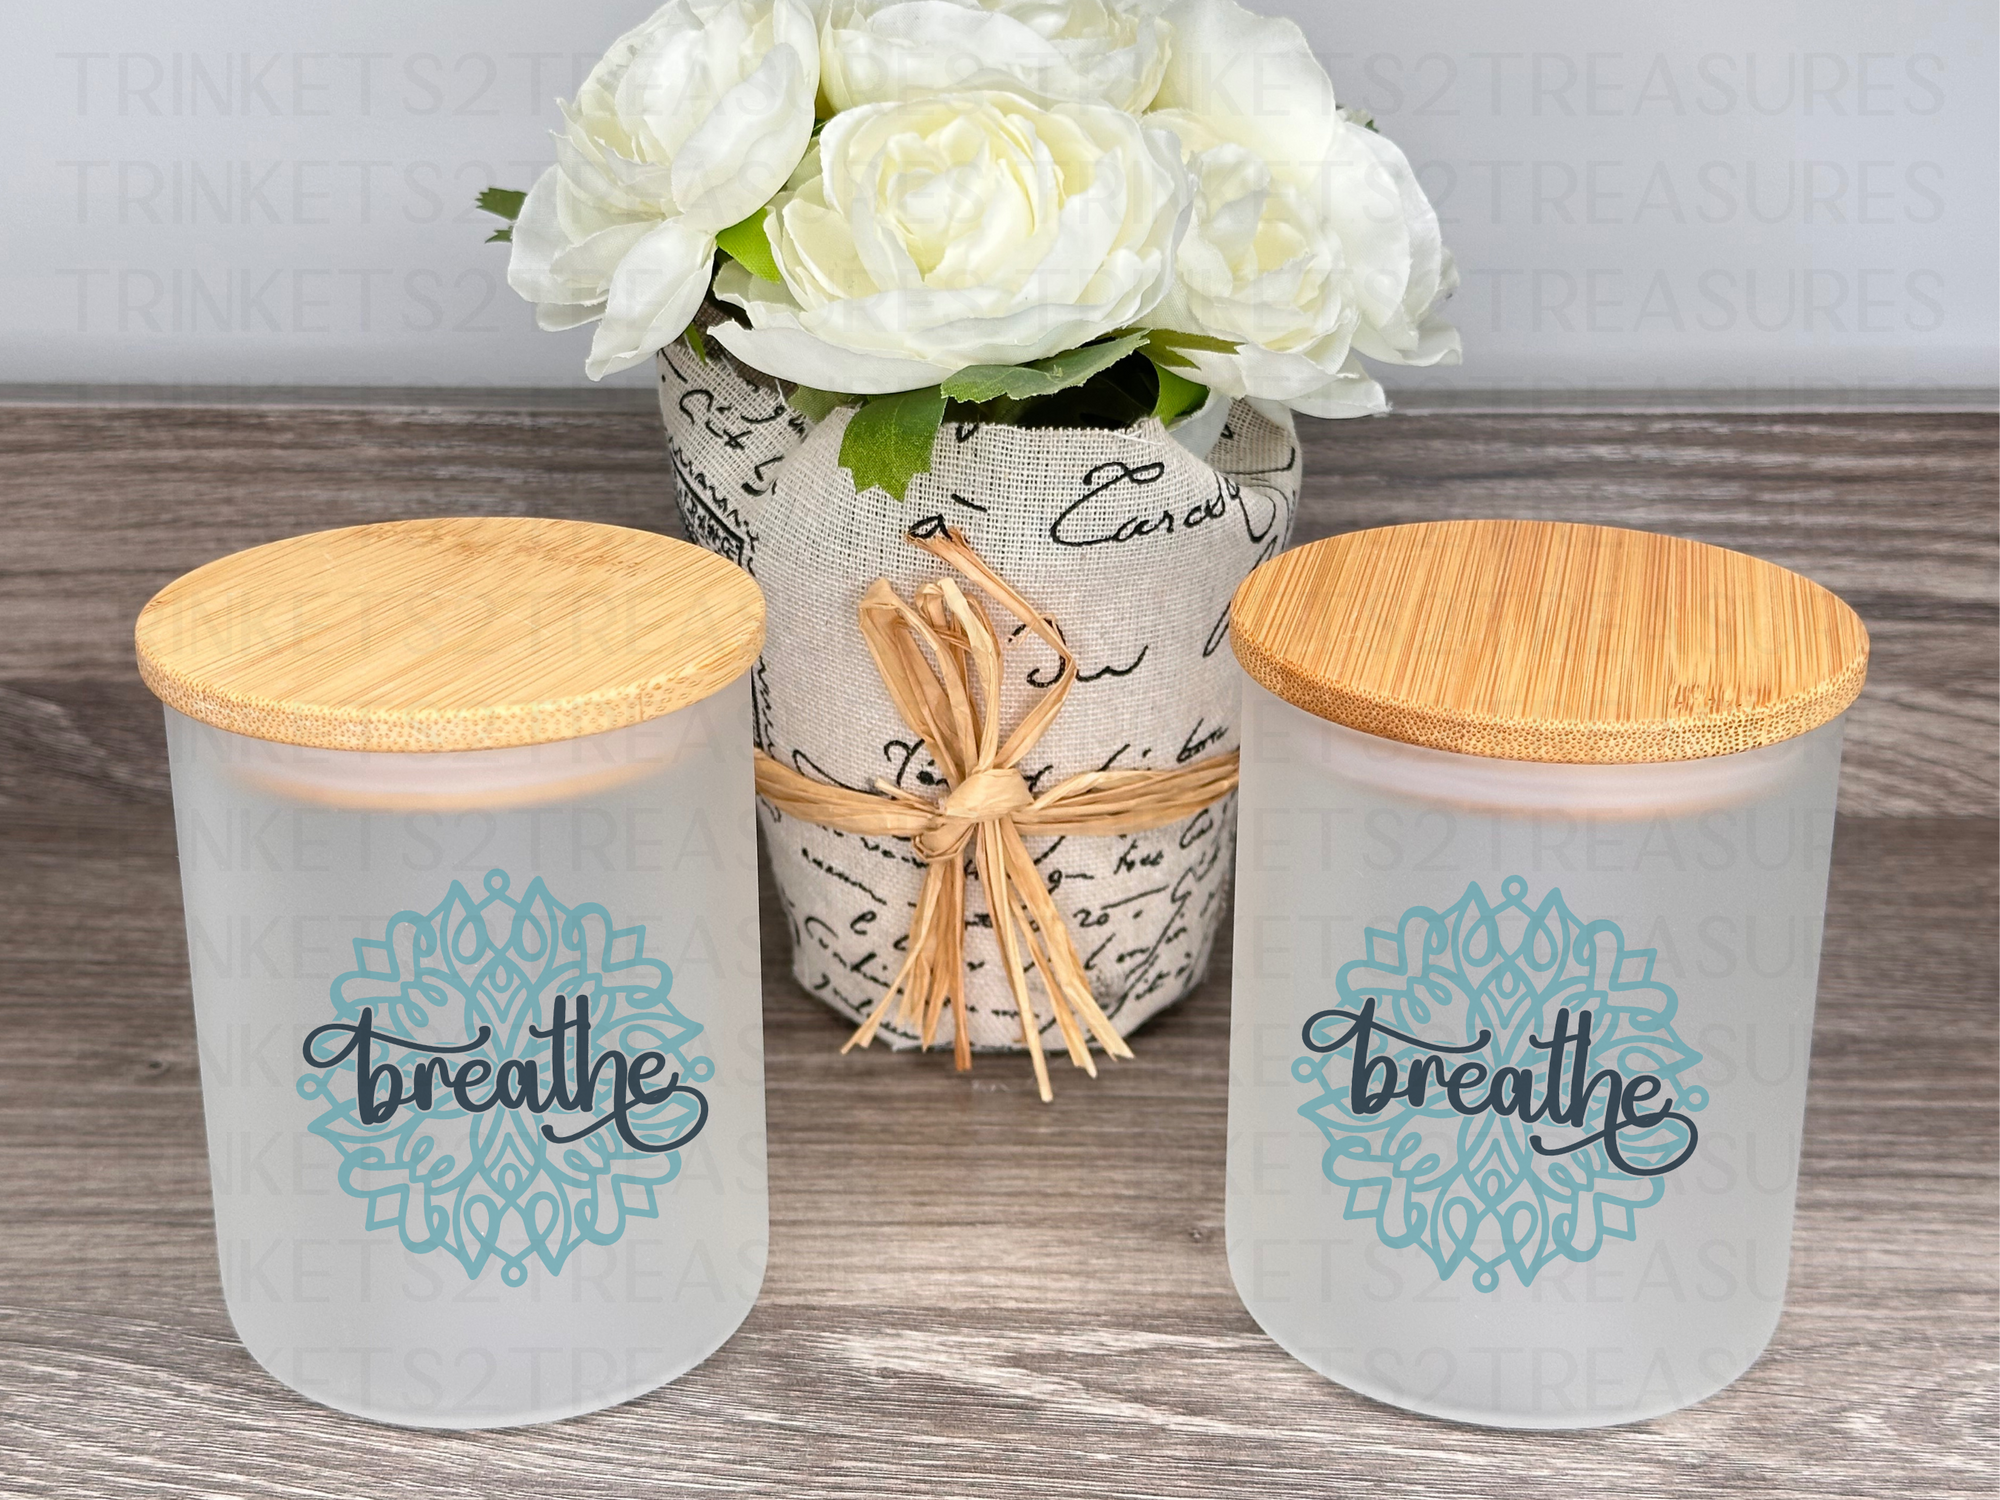 10 oz Frosted Candle Jars with Bamboo Lid/Multi-Purpose Jar/Breathe/#500